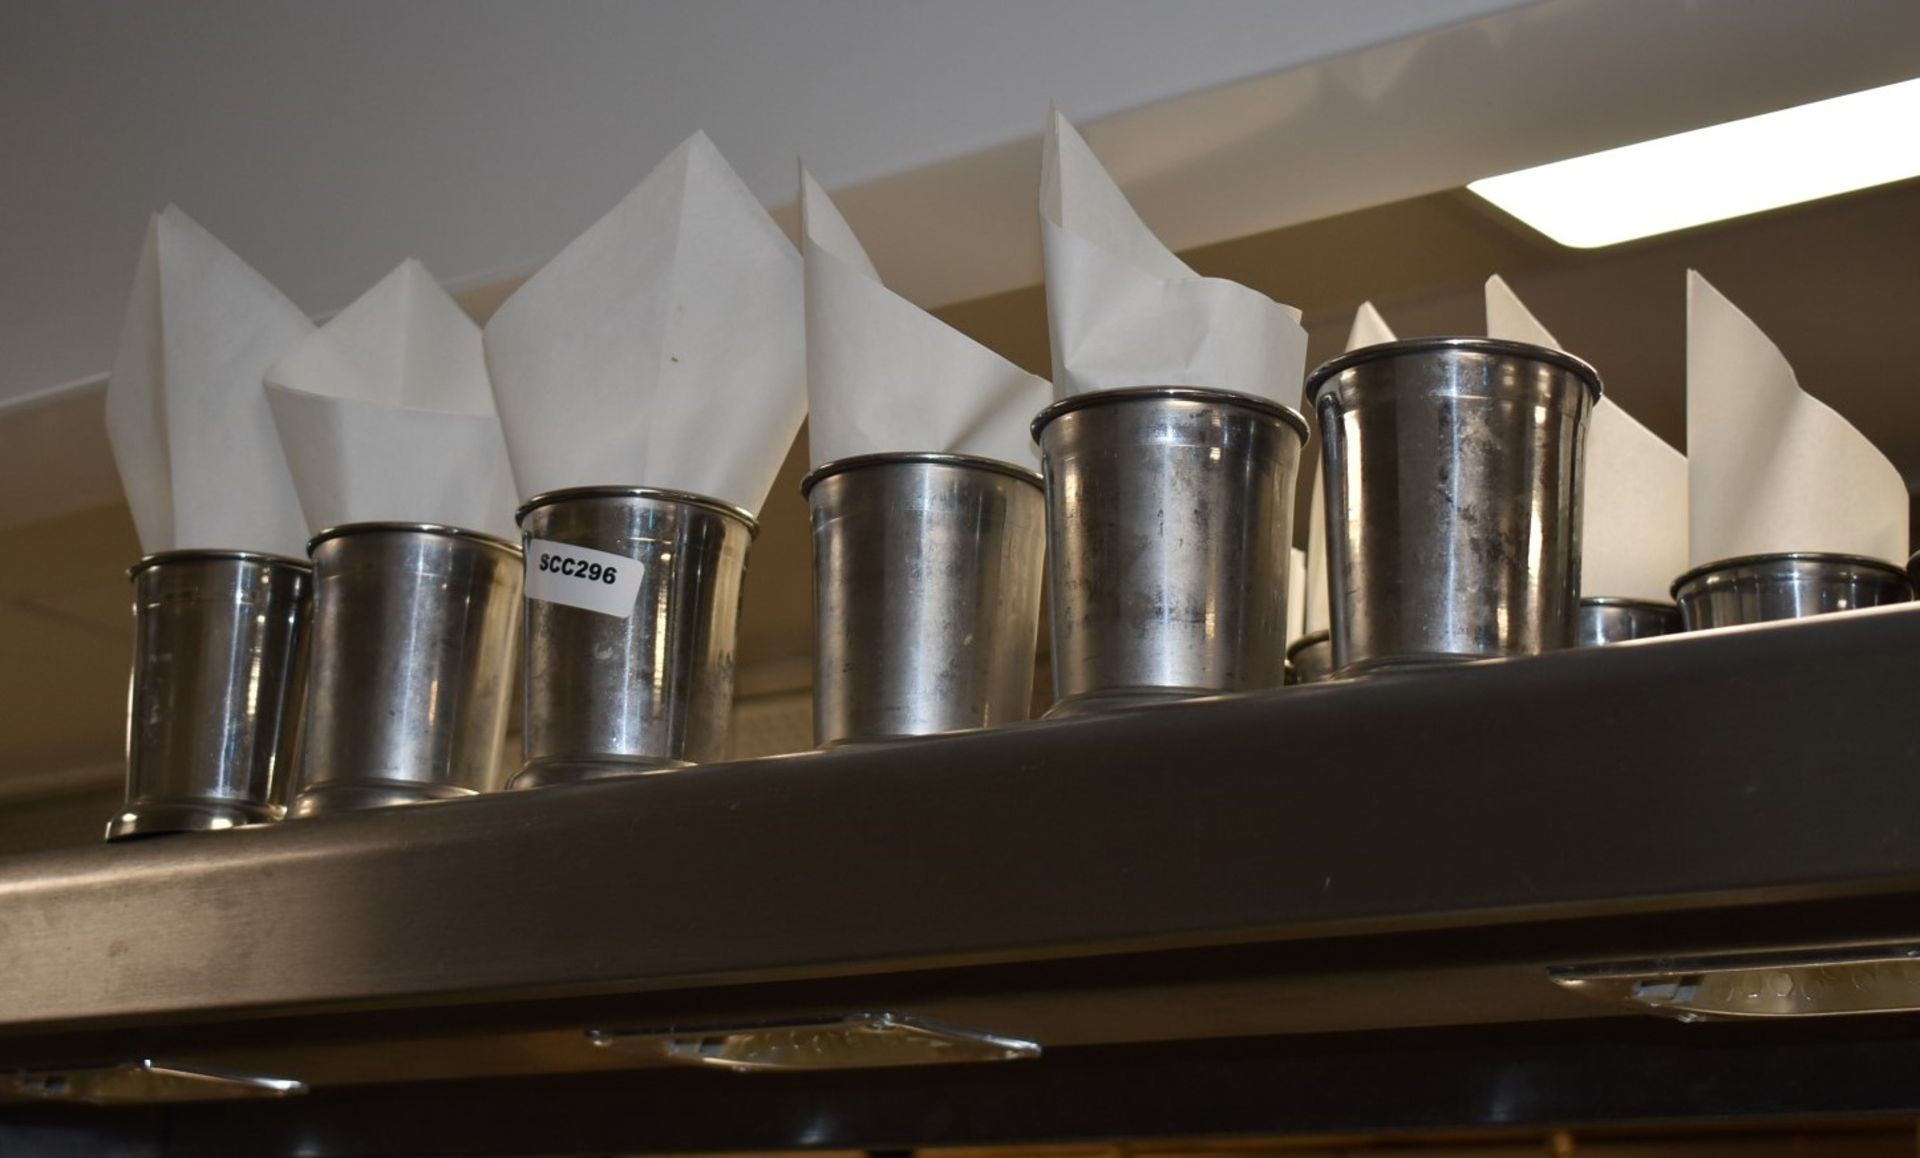 13 x Restaurant Chip Serving Buckets With Napkins By Mexclar - Stainless Steel Finish - Image 5 of 6